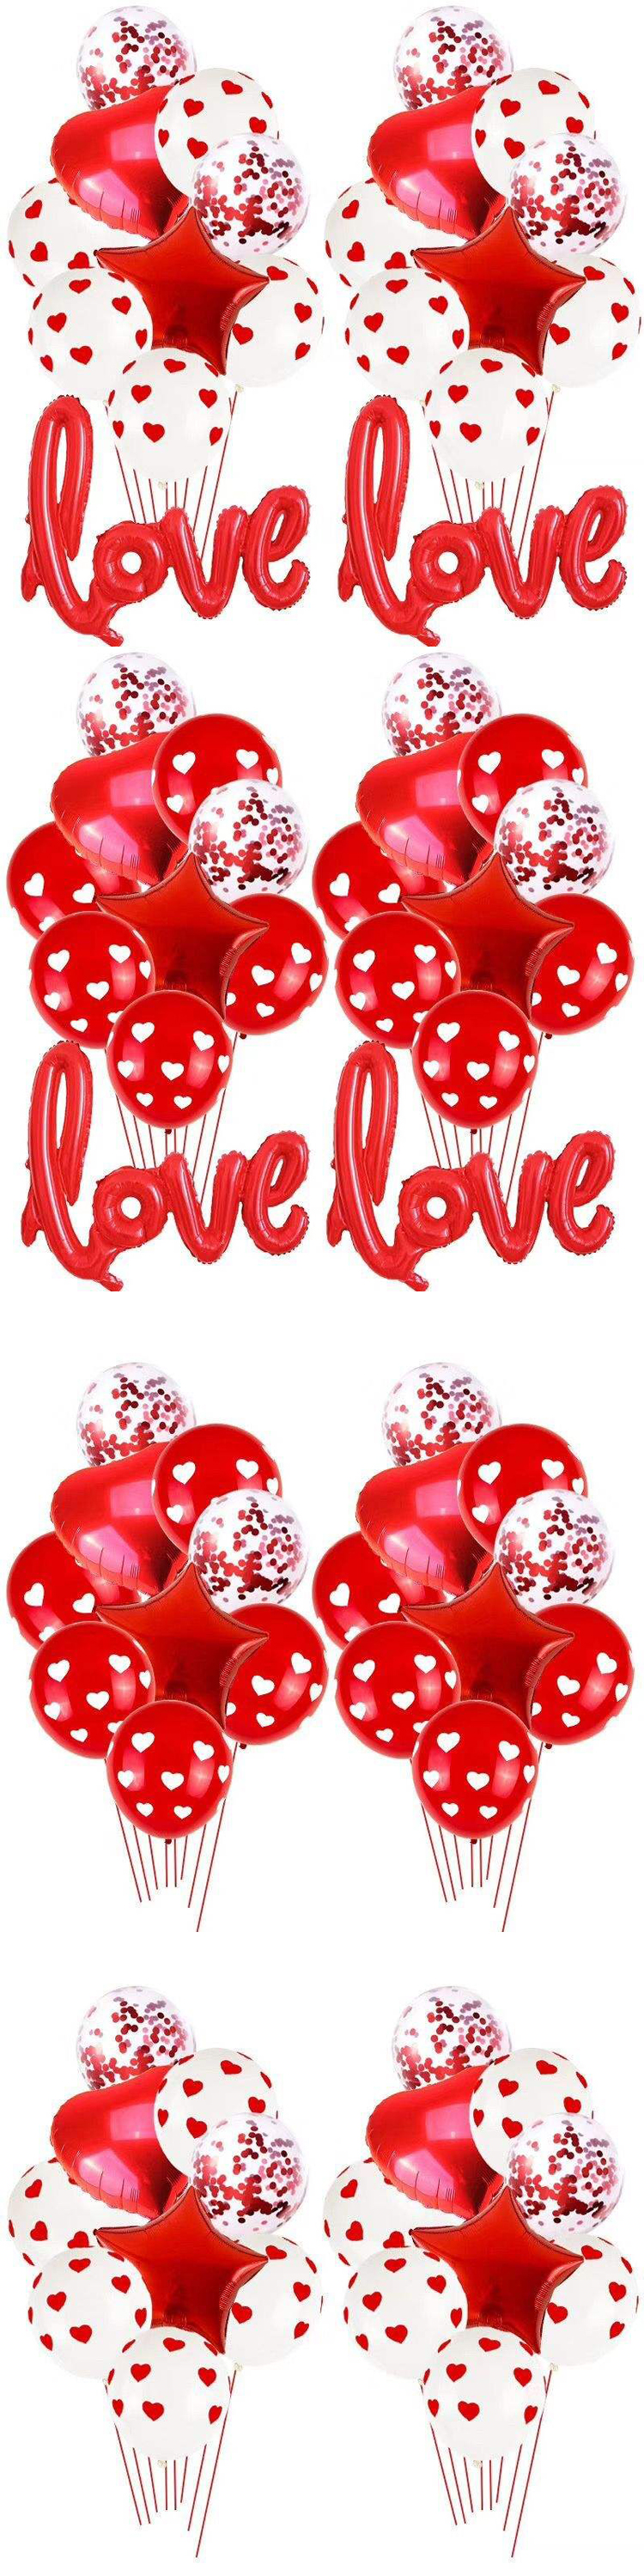 PAFU wedding party supplies red love foil balloon red and white heart latex balloon valentines's day decorations